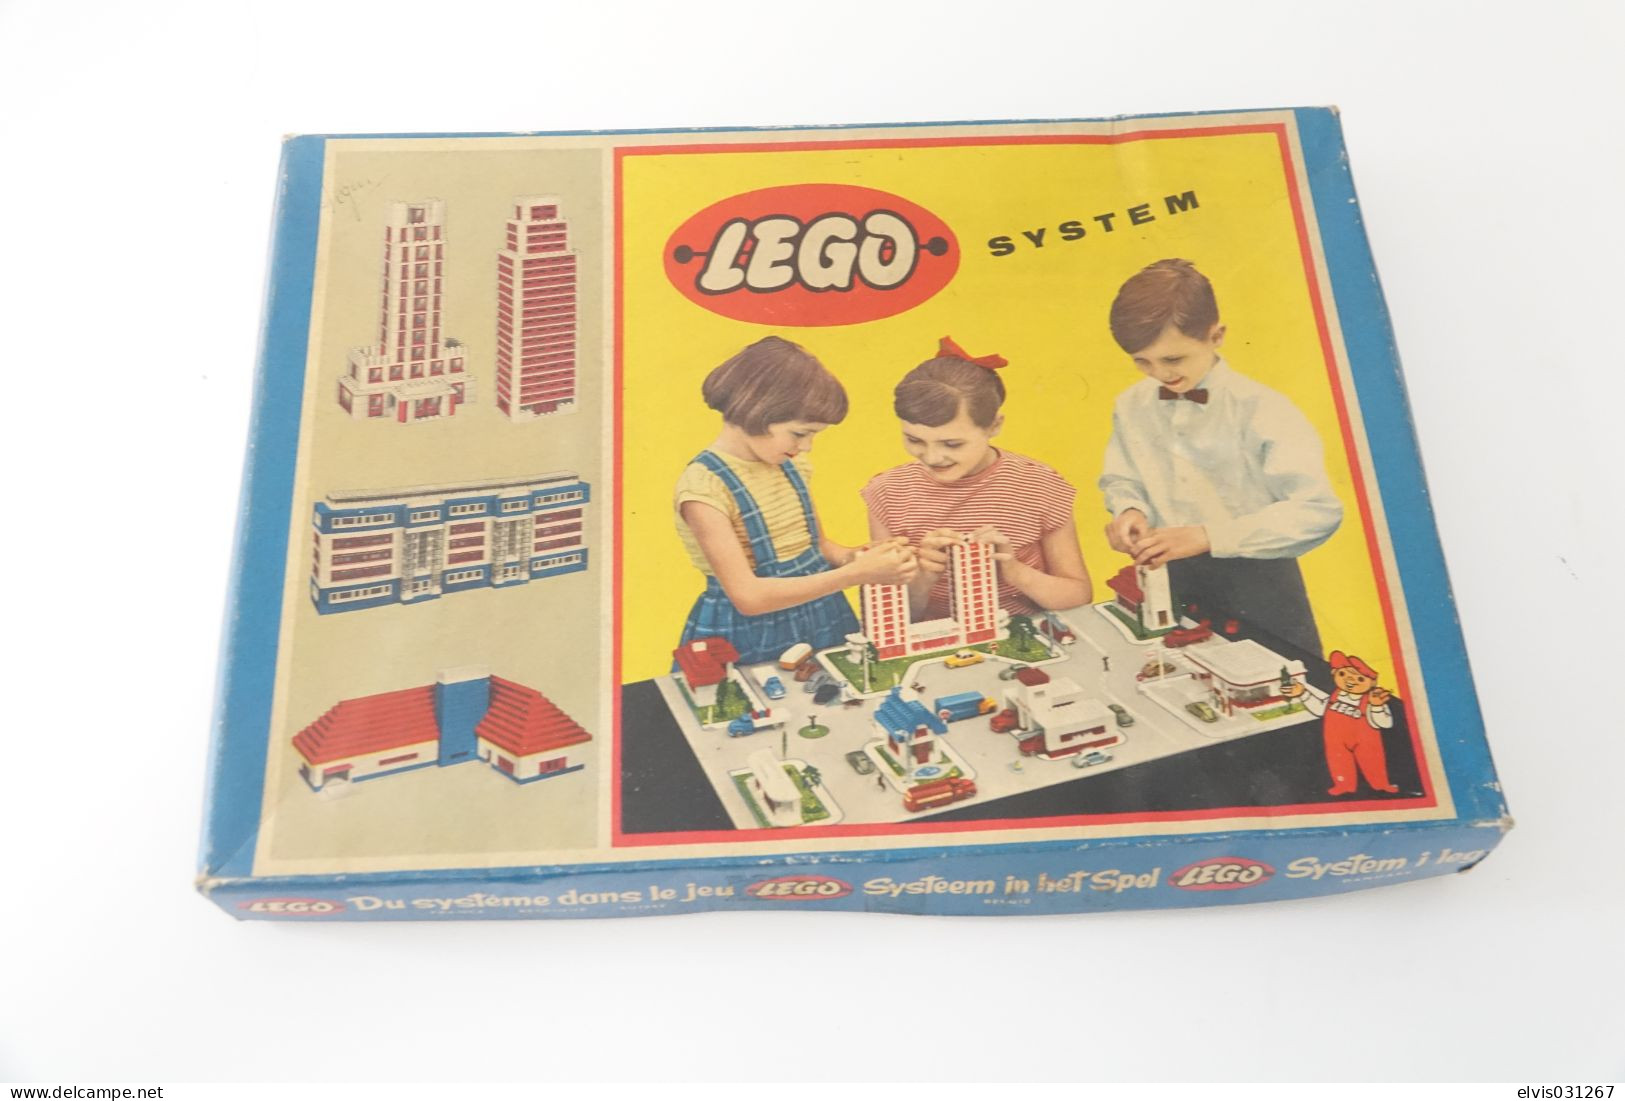 LEGO - 700/3a Gift Package (Lego Mursten) Extremely Rare BOX ONLY - Collector Item - Original Lego 1954 - Vintage - Catalogi